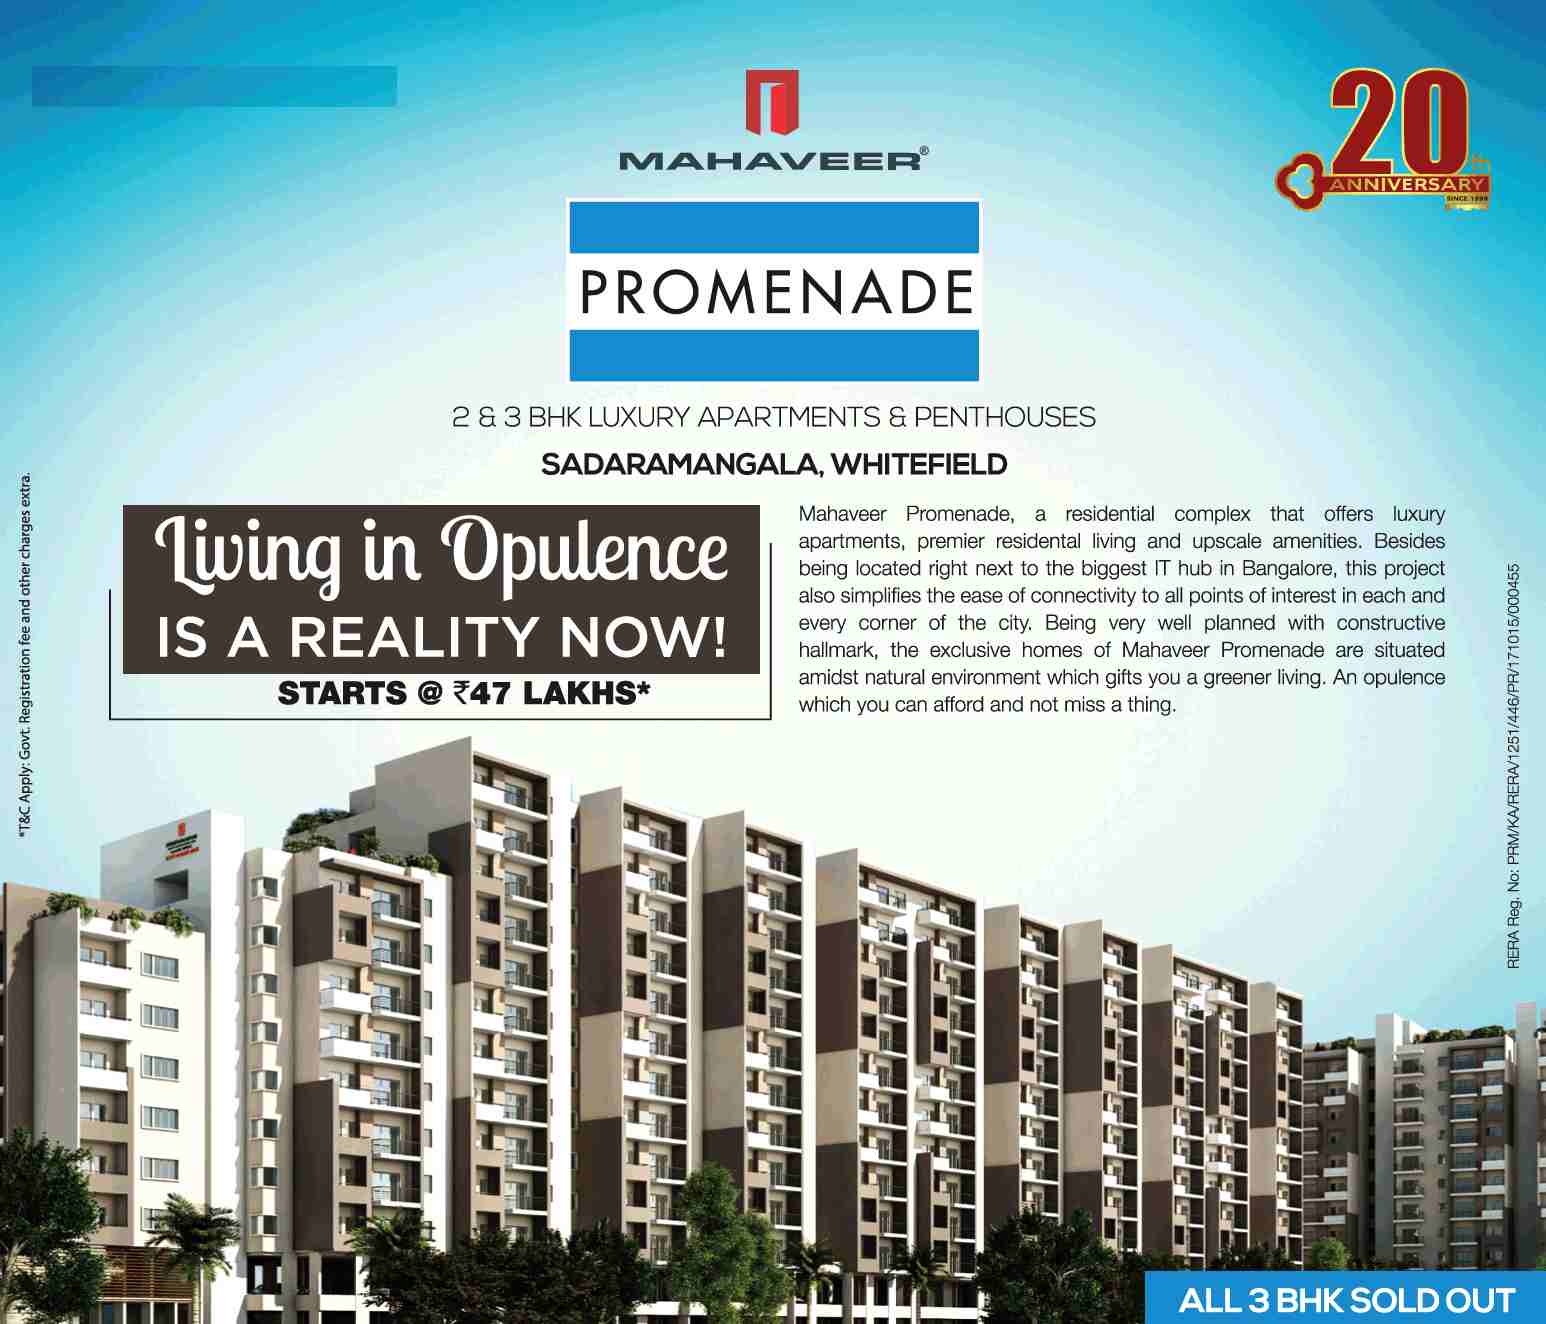 Living in opulence is a reality now which starts at Rs. 47 Lakhs at Mahaveer Promenade in Bangalore Update